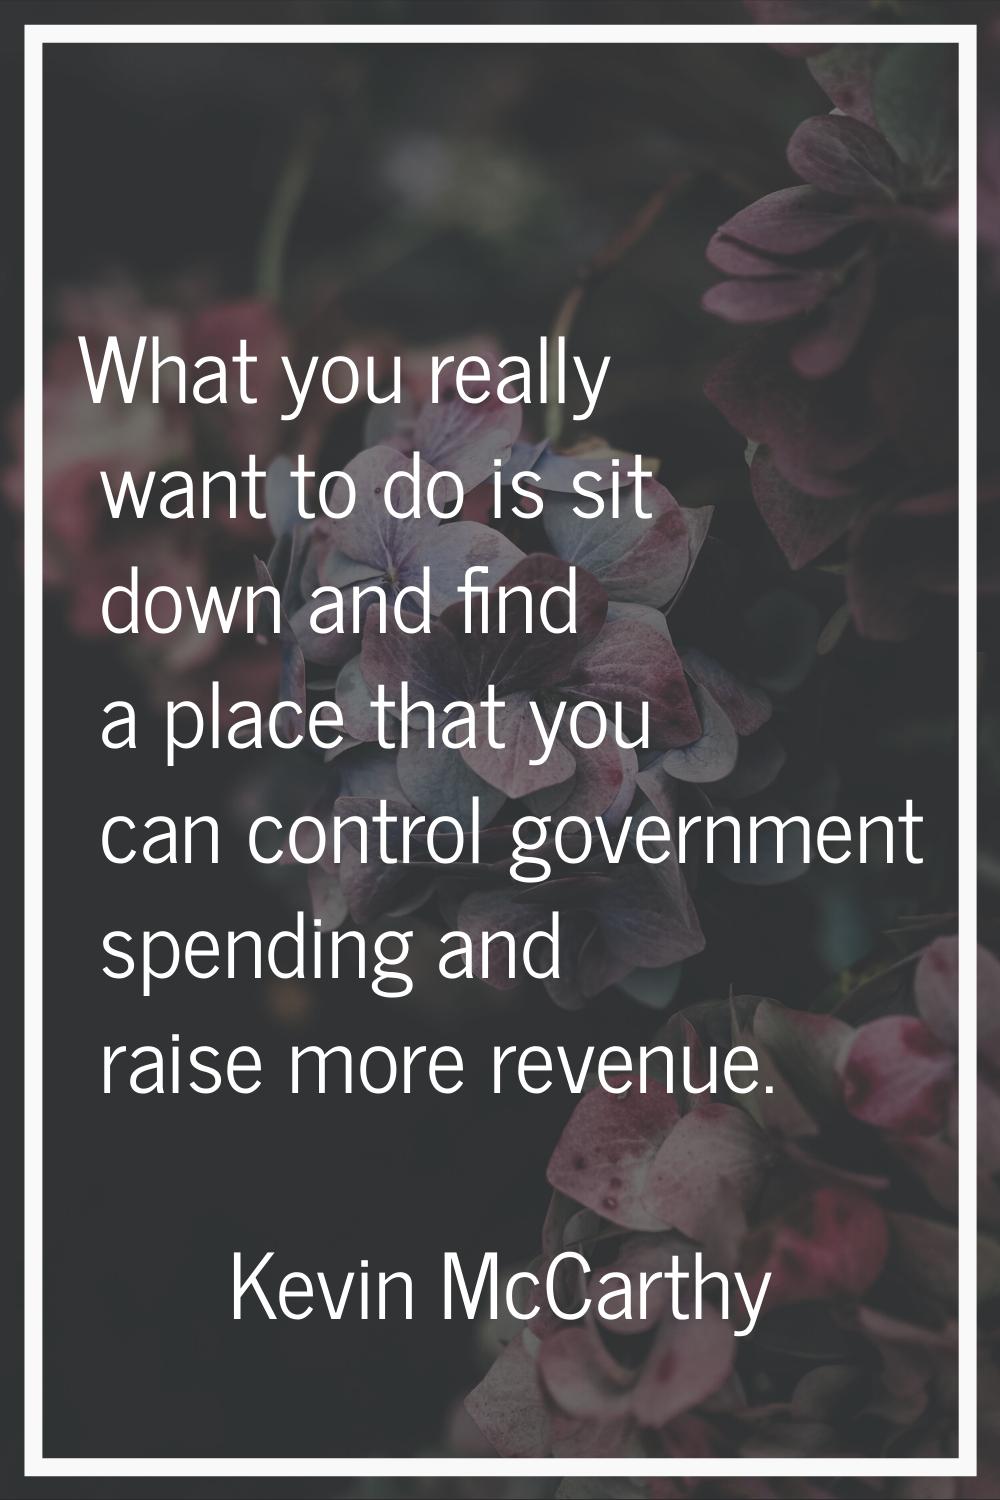 What you really want to do is sit down and find a place that you can control government spending an